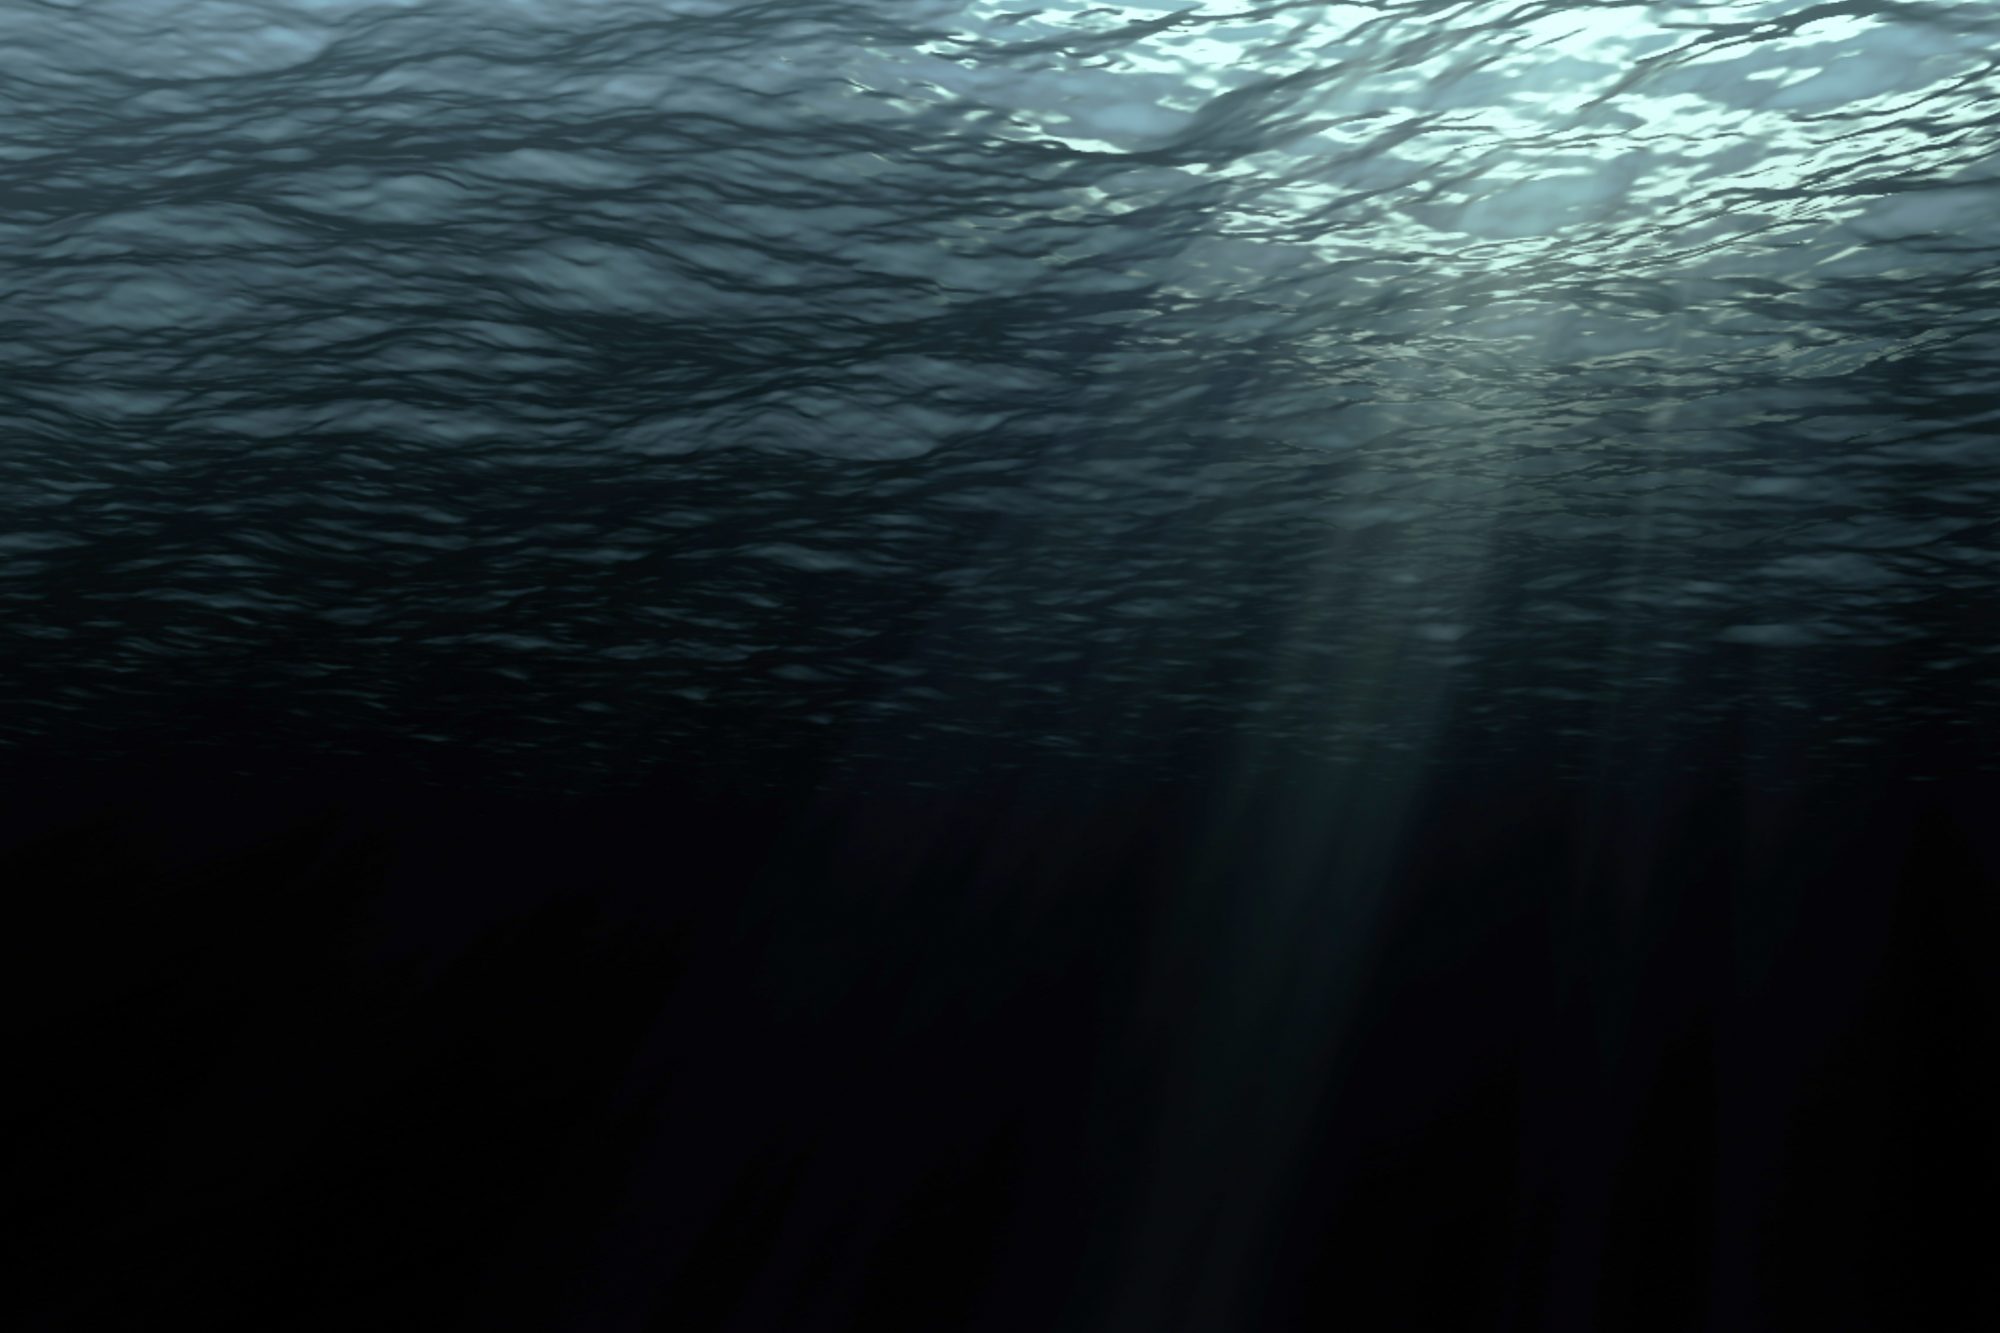 Deep ocean warming to increase by 0.2°C in the next 50 years - Open Access Government